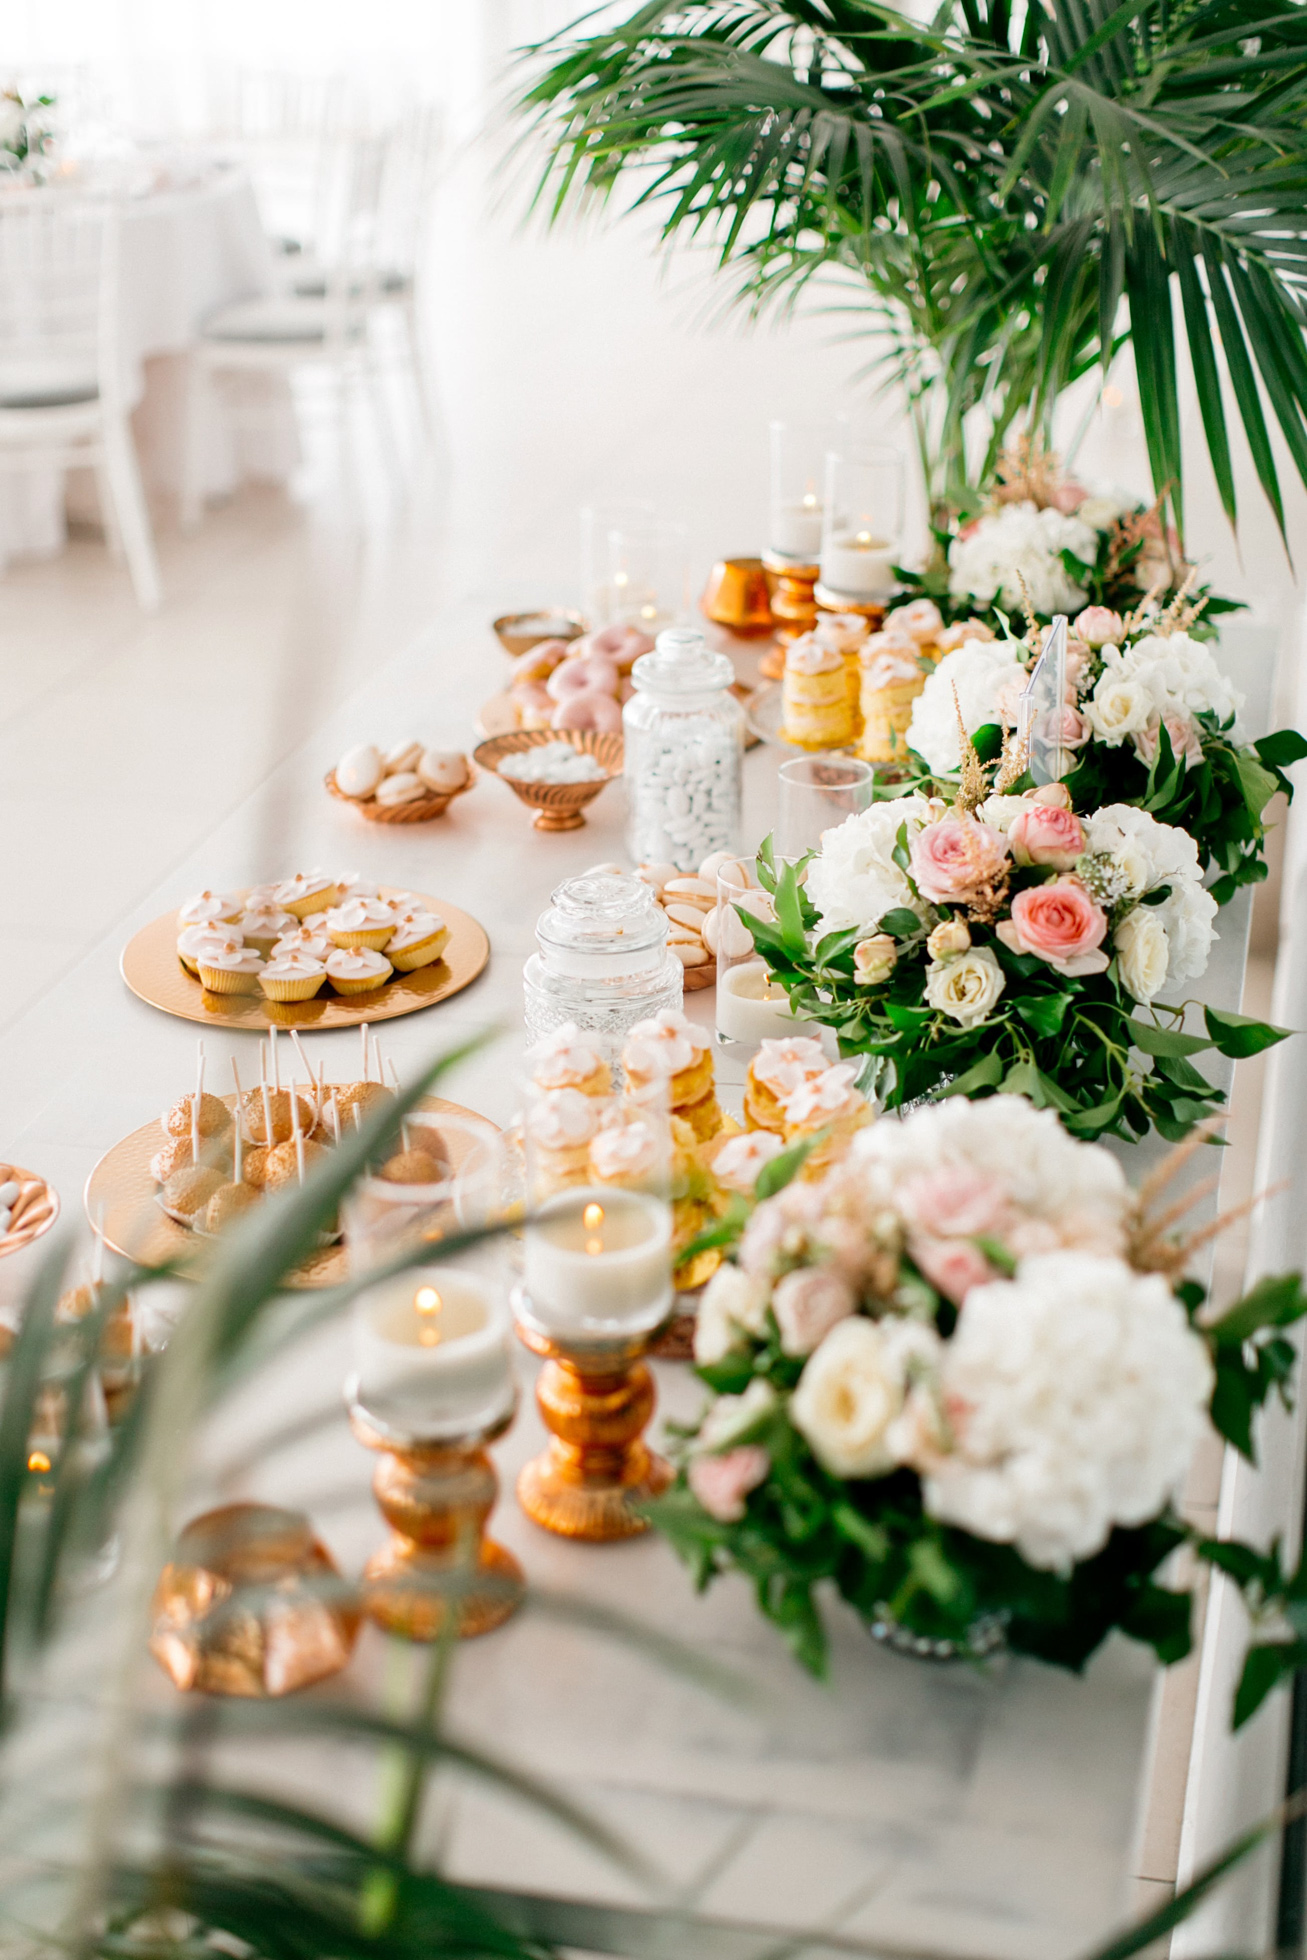 Wedding dinner details and reception decoration in white and blush pink including the sweets table at Le Ciel wedding estate in Santorini island, Greece.